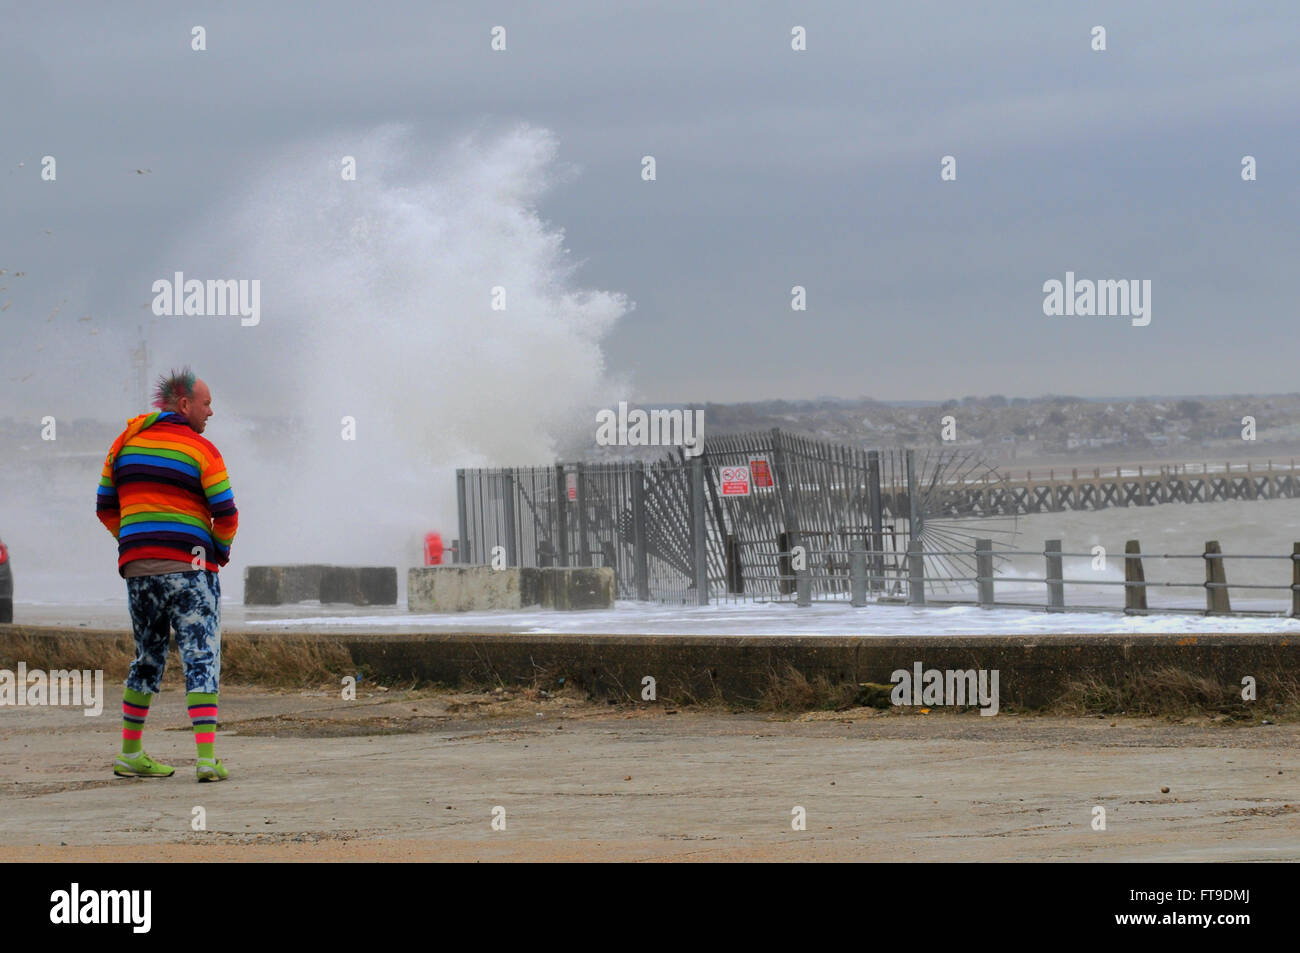 Newhaven, East Sussex, UK.26 March 2016.Windy weather arrives on the South coast. This colourful character brightens the scene. . Stock Photo